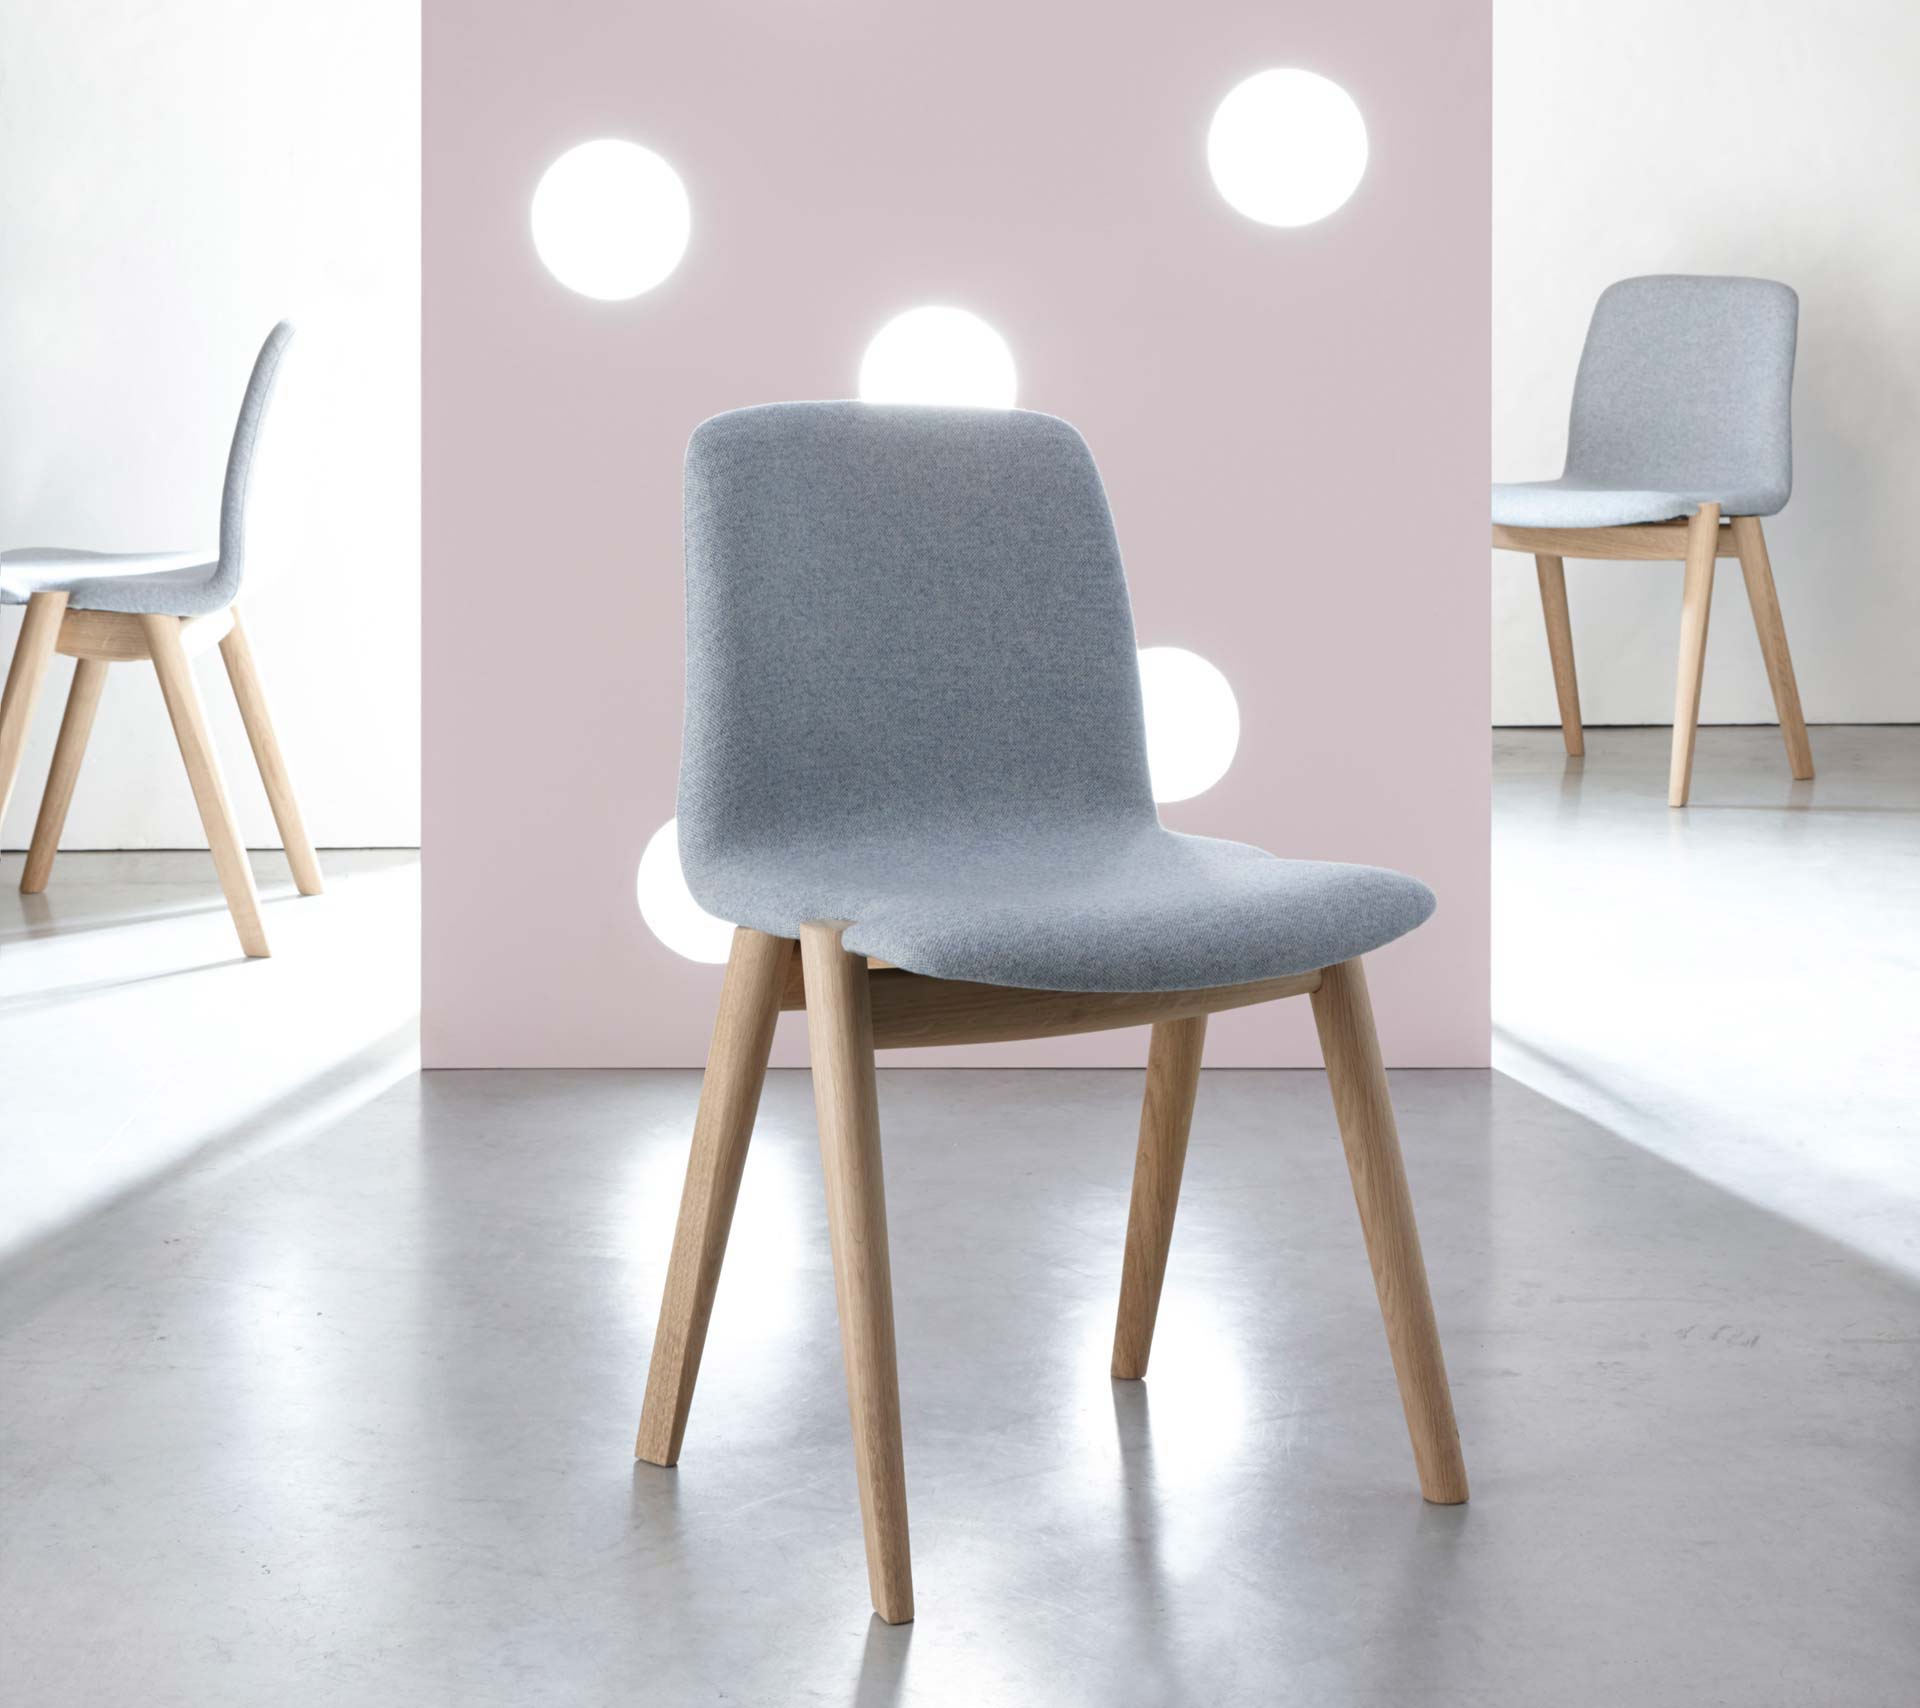 HOLE Chairs by Marc Th. van der Voorn for Spoinq